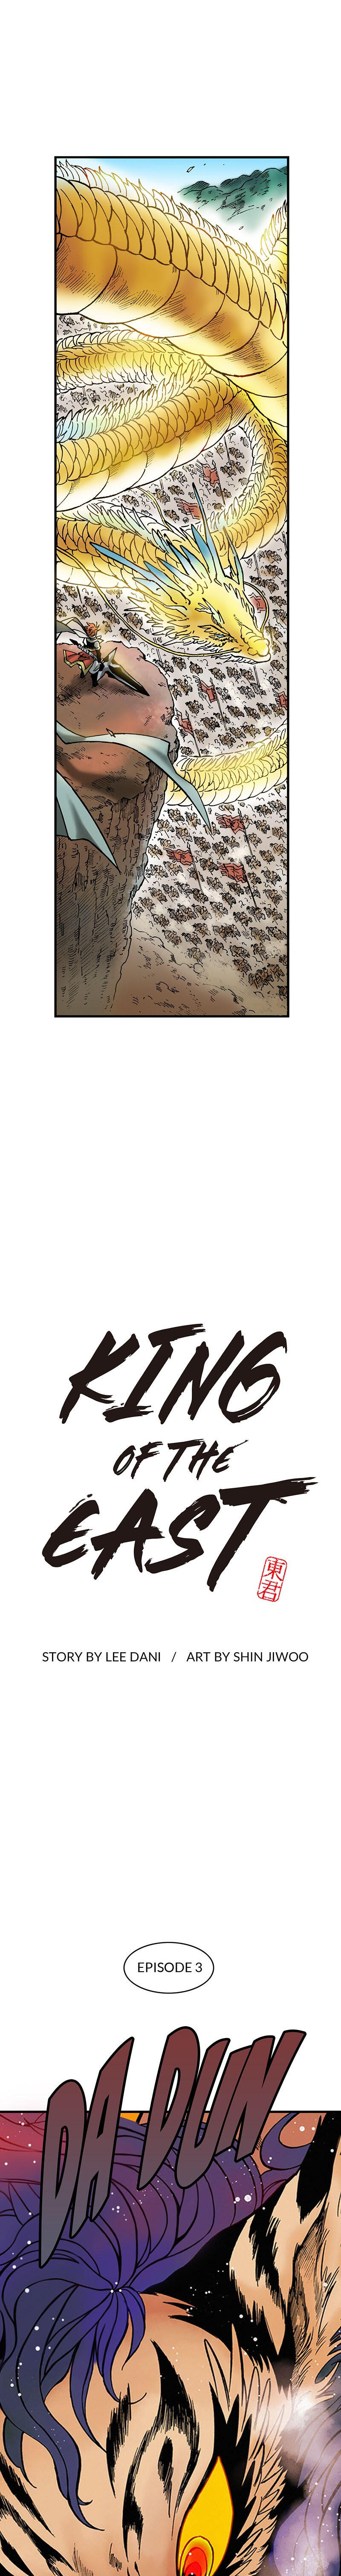 King of the East Chapter 3